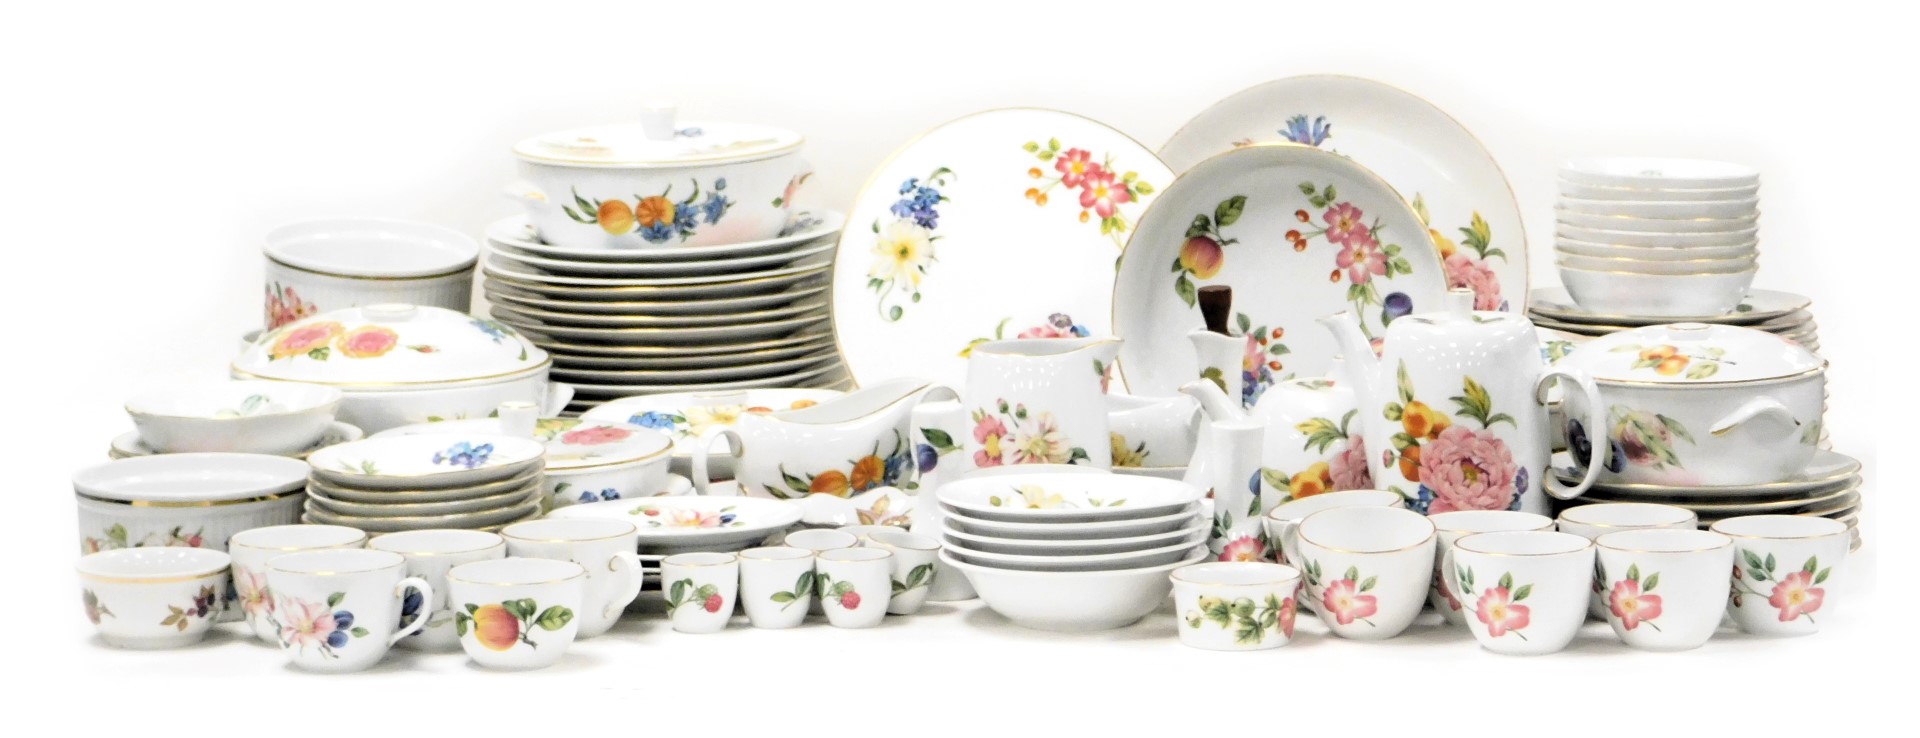 A Royal Worcester porcelain Pershore pattern dinner, tea and coffee service, oven to table wares, in